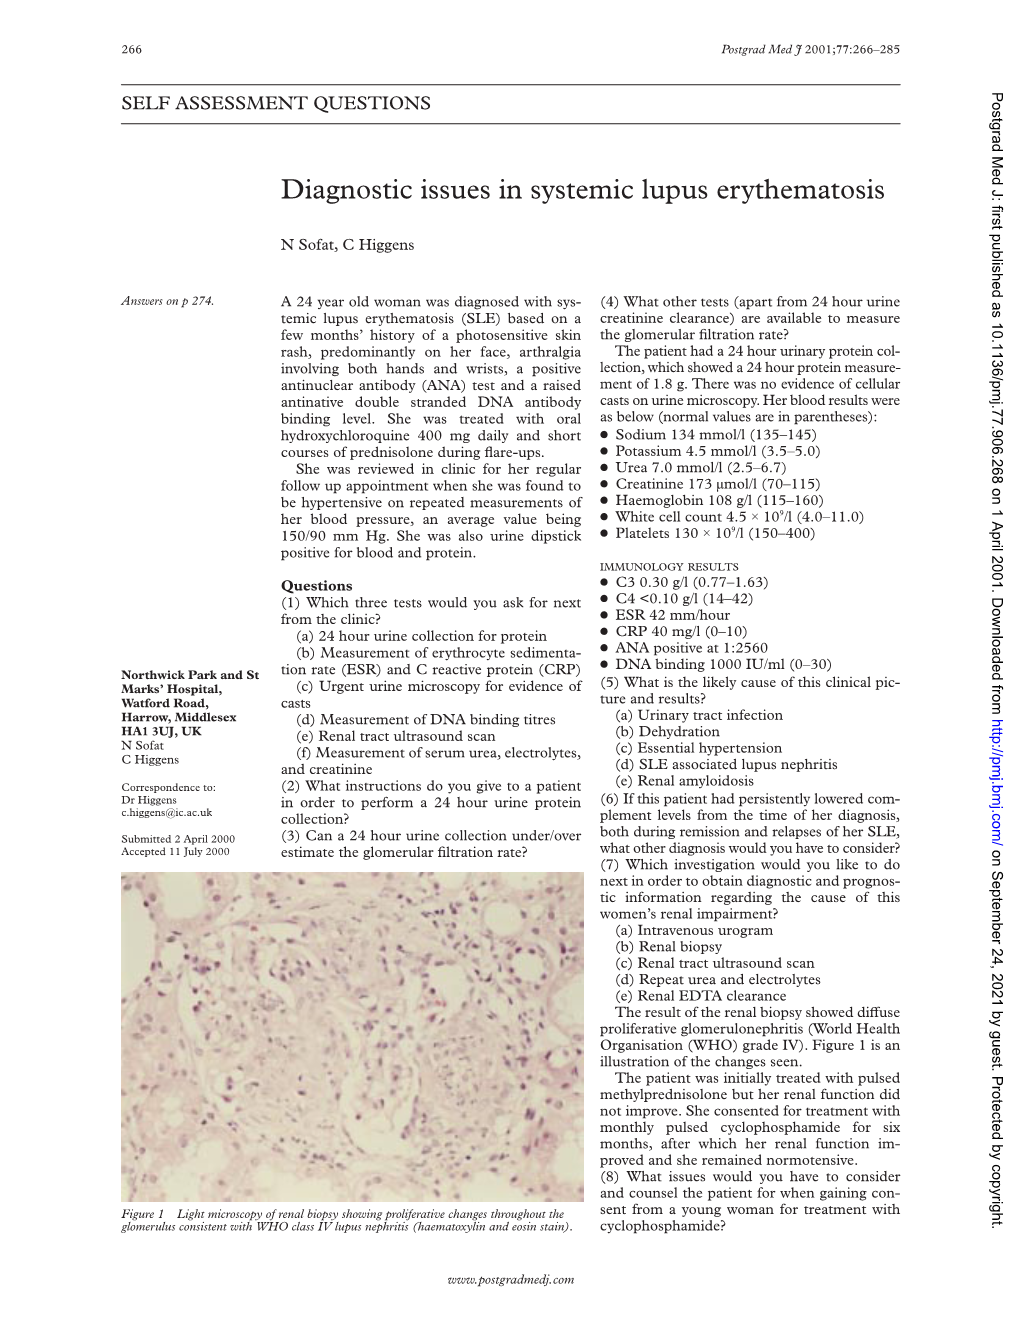 Diagnostic Issues in Systemic Lupus Erythematosis